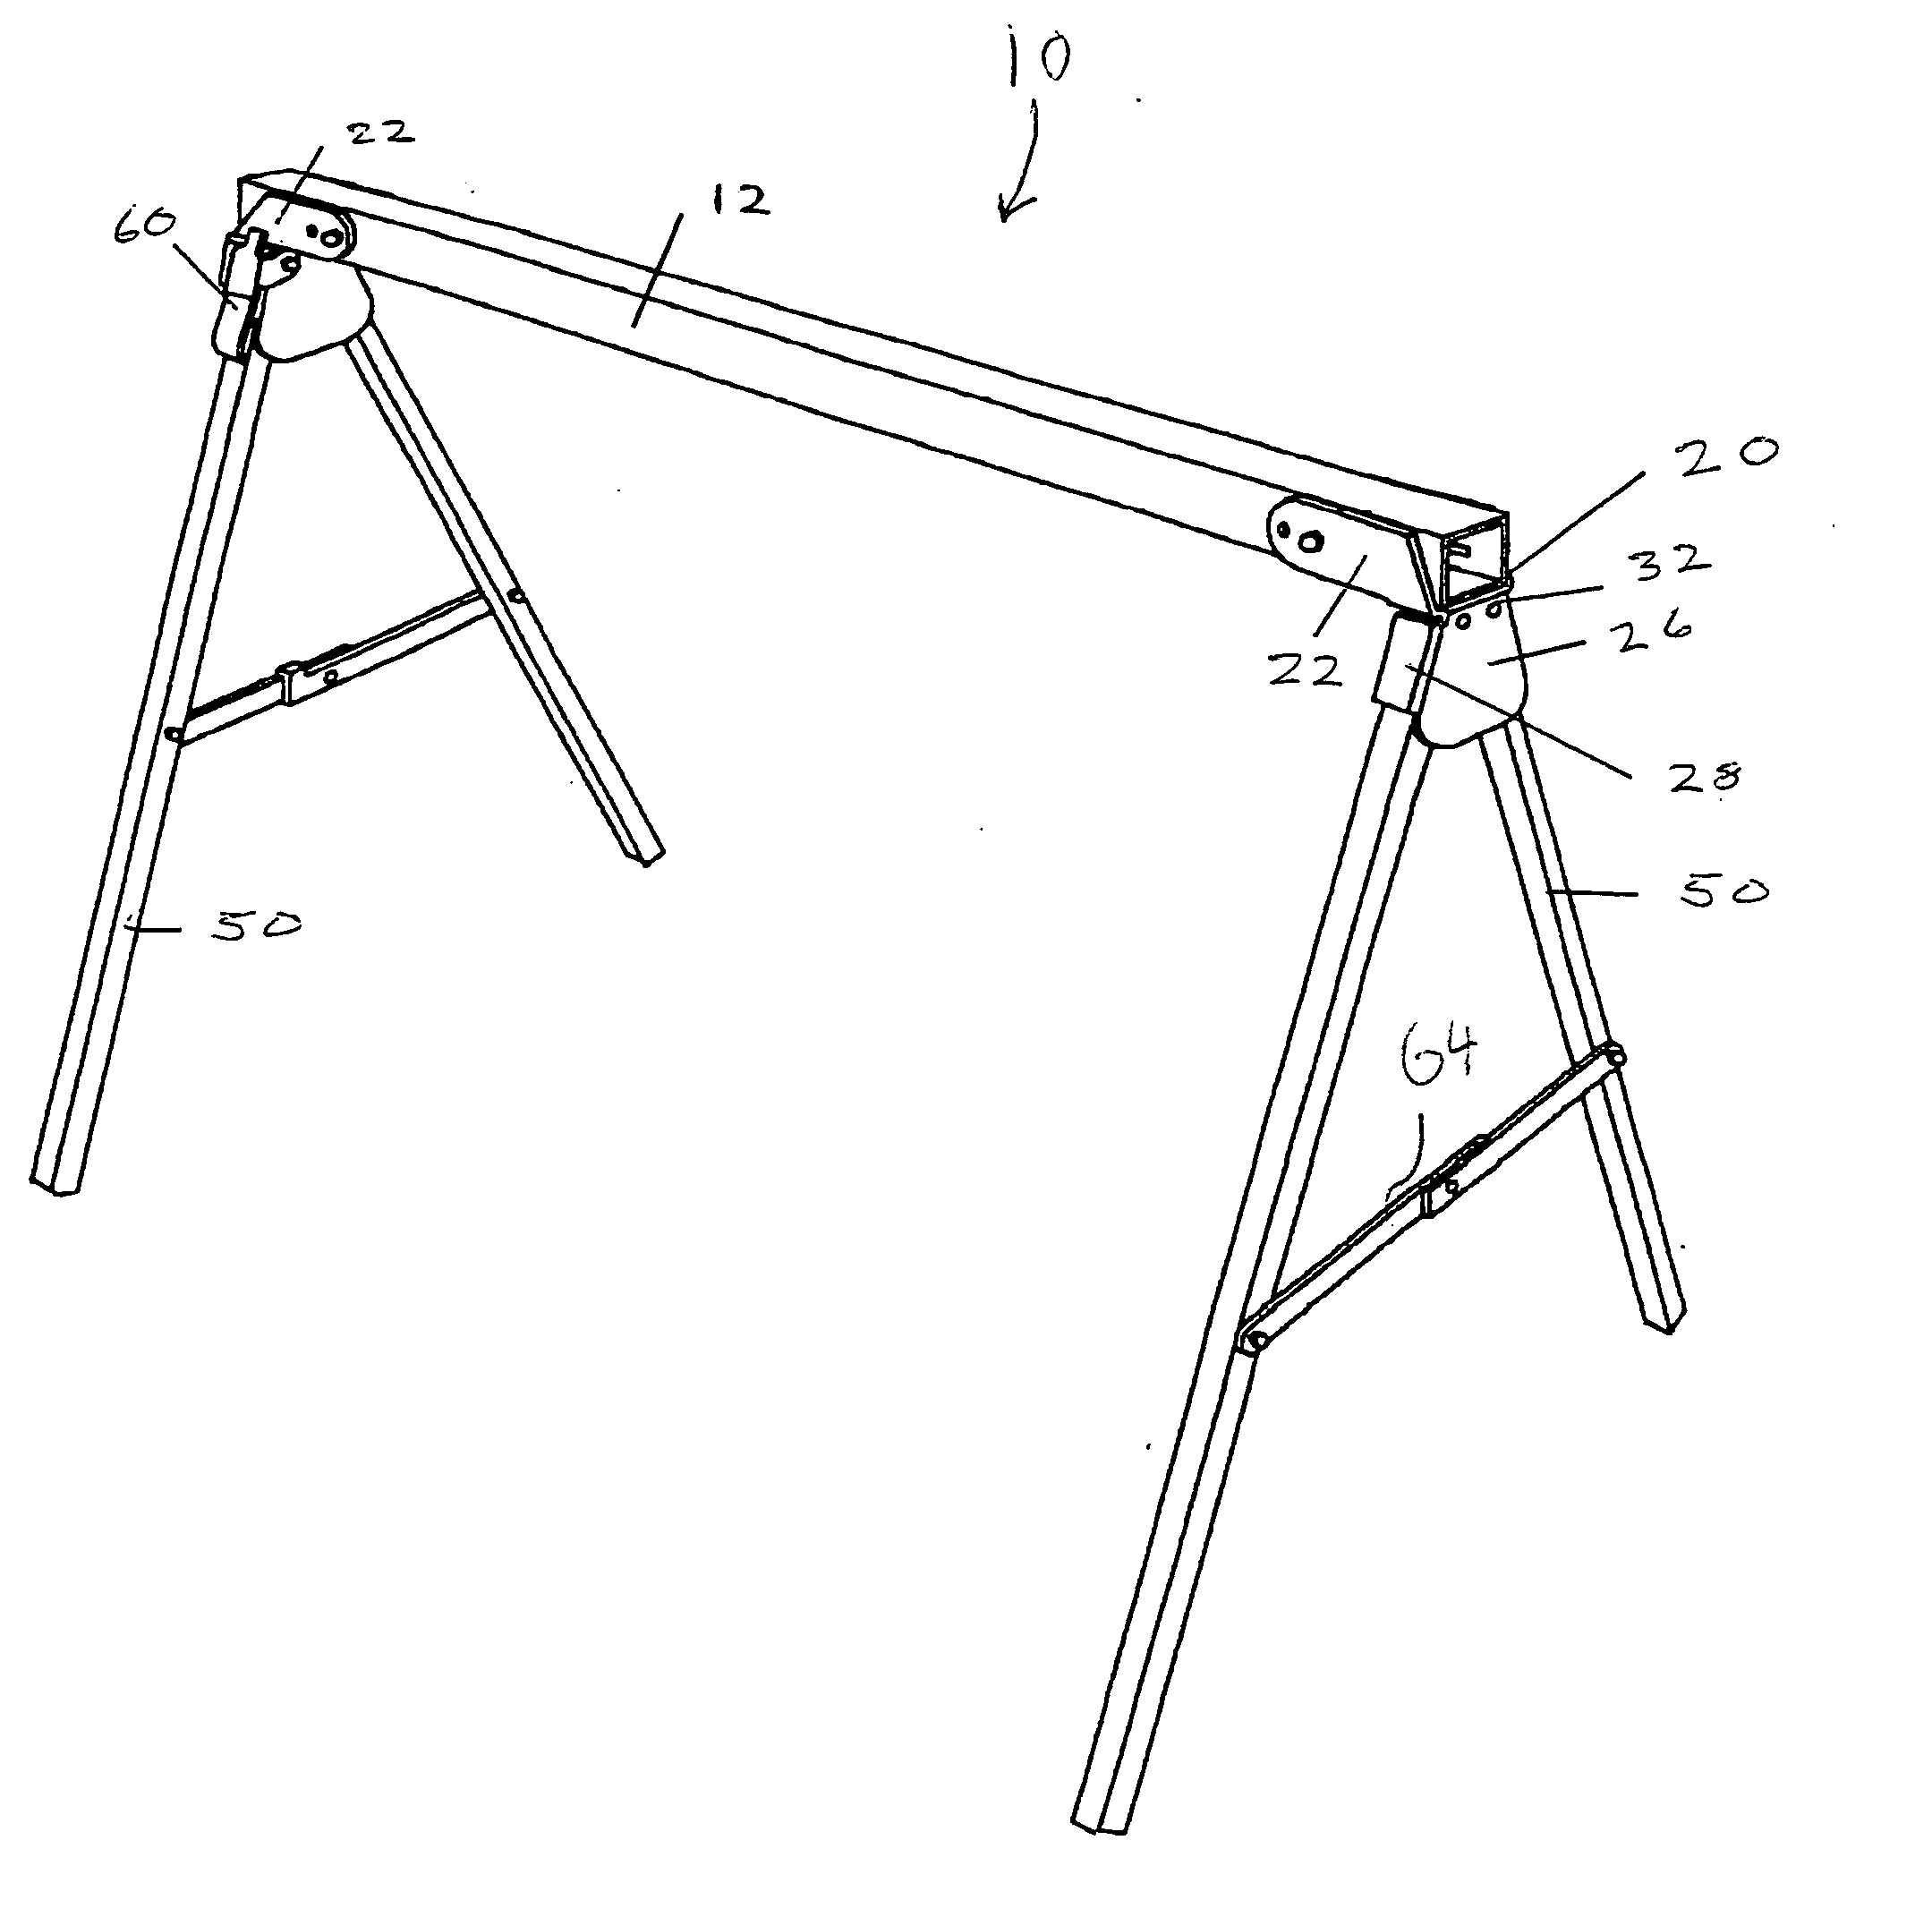 Collapsible support assembly